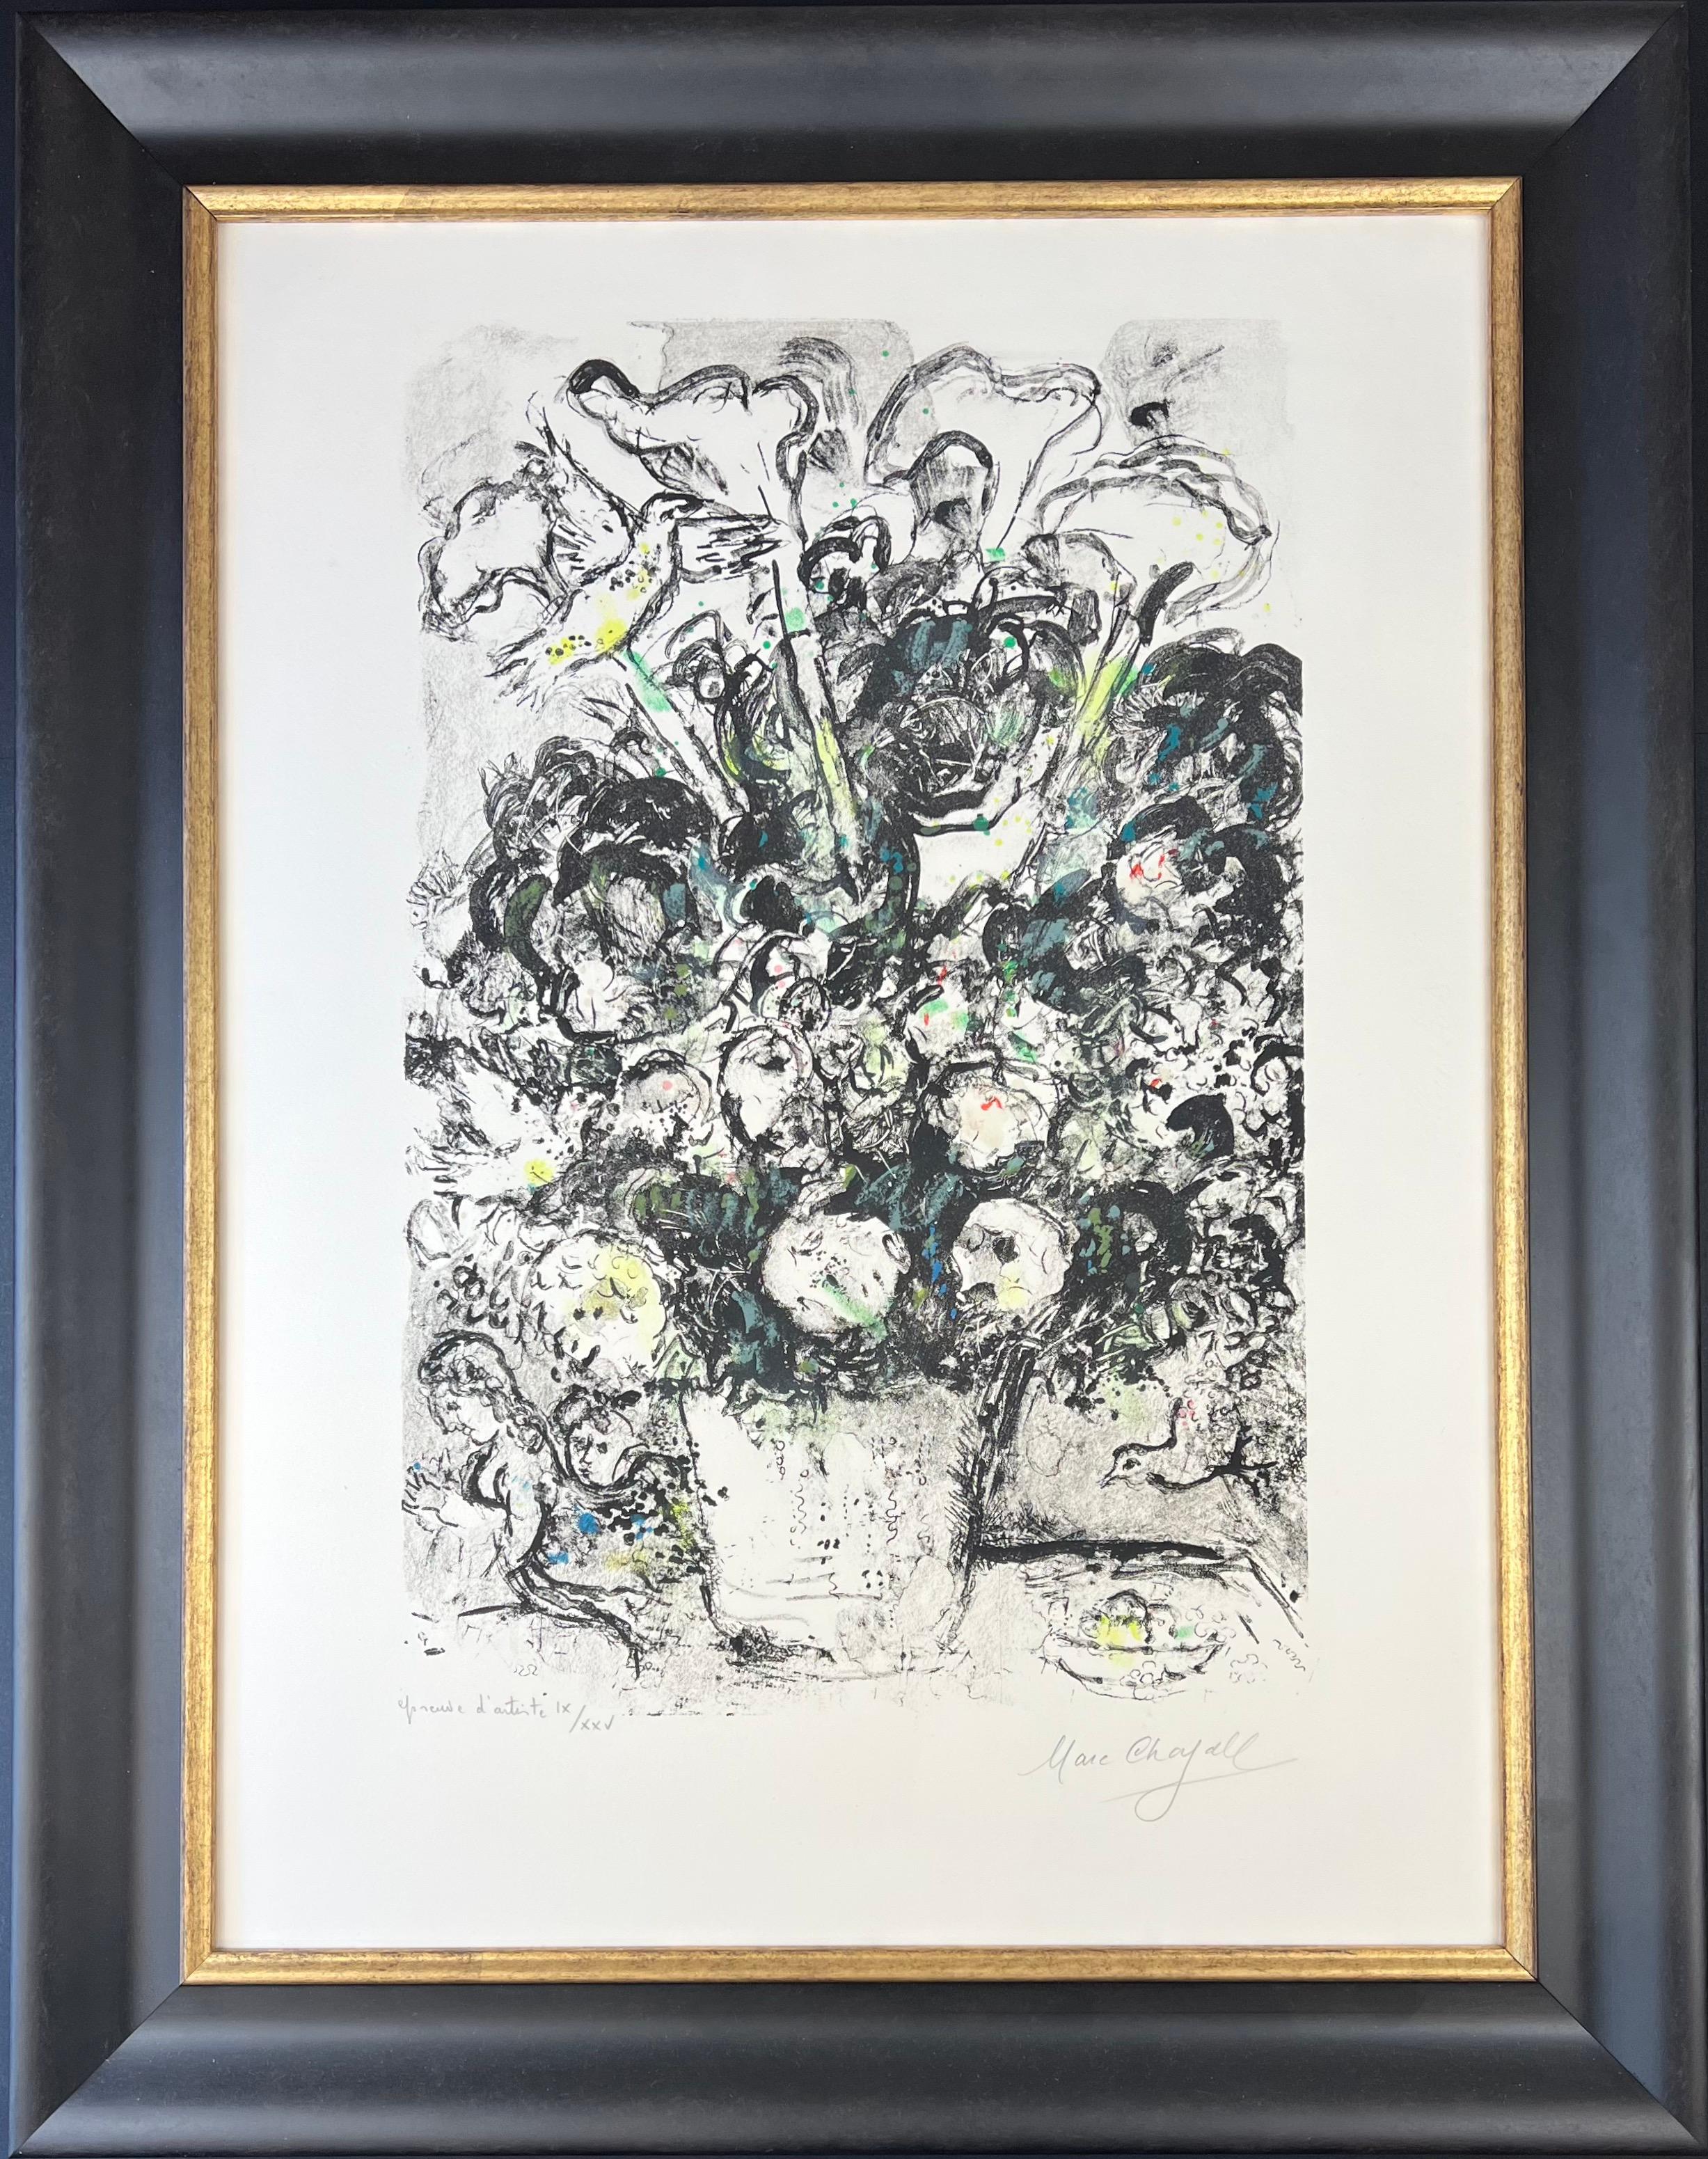 Color lithograph on Arches paper, edited in 1969
Limited edition of 50 copies plus 25 in roman numbers
signed in pencil by artist in lower right corner and numbered IX/XXV in lower left corner
Framed size: 90 x 70,5 cm
paper size: : 75 x 54,5